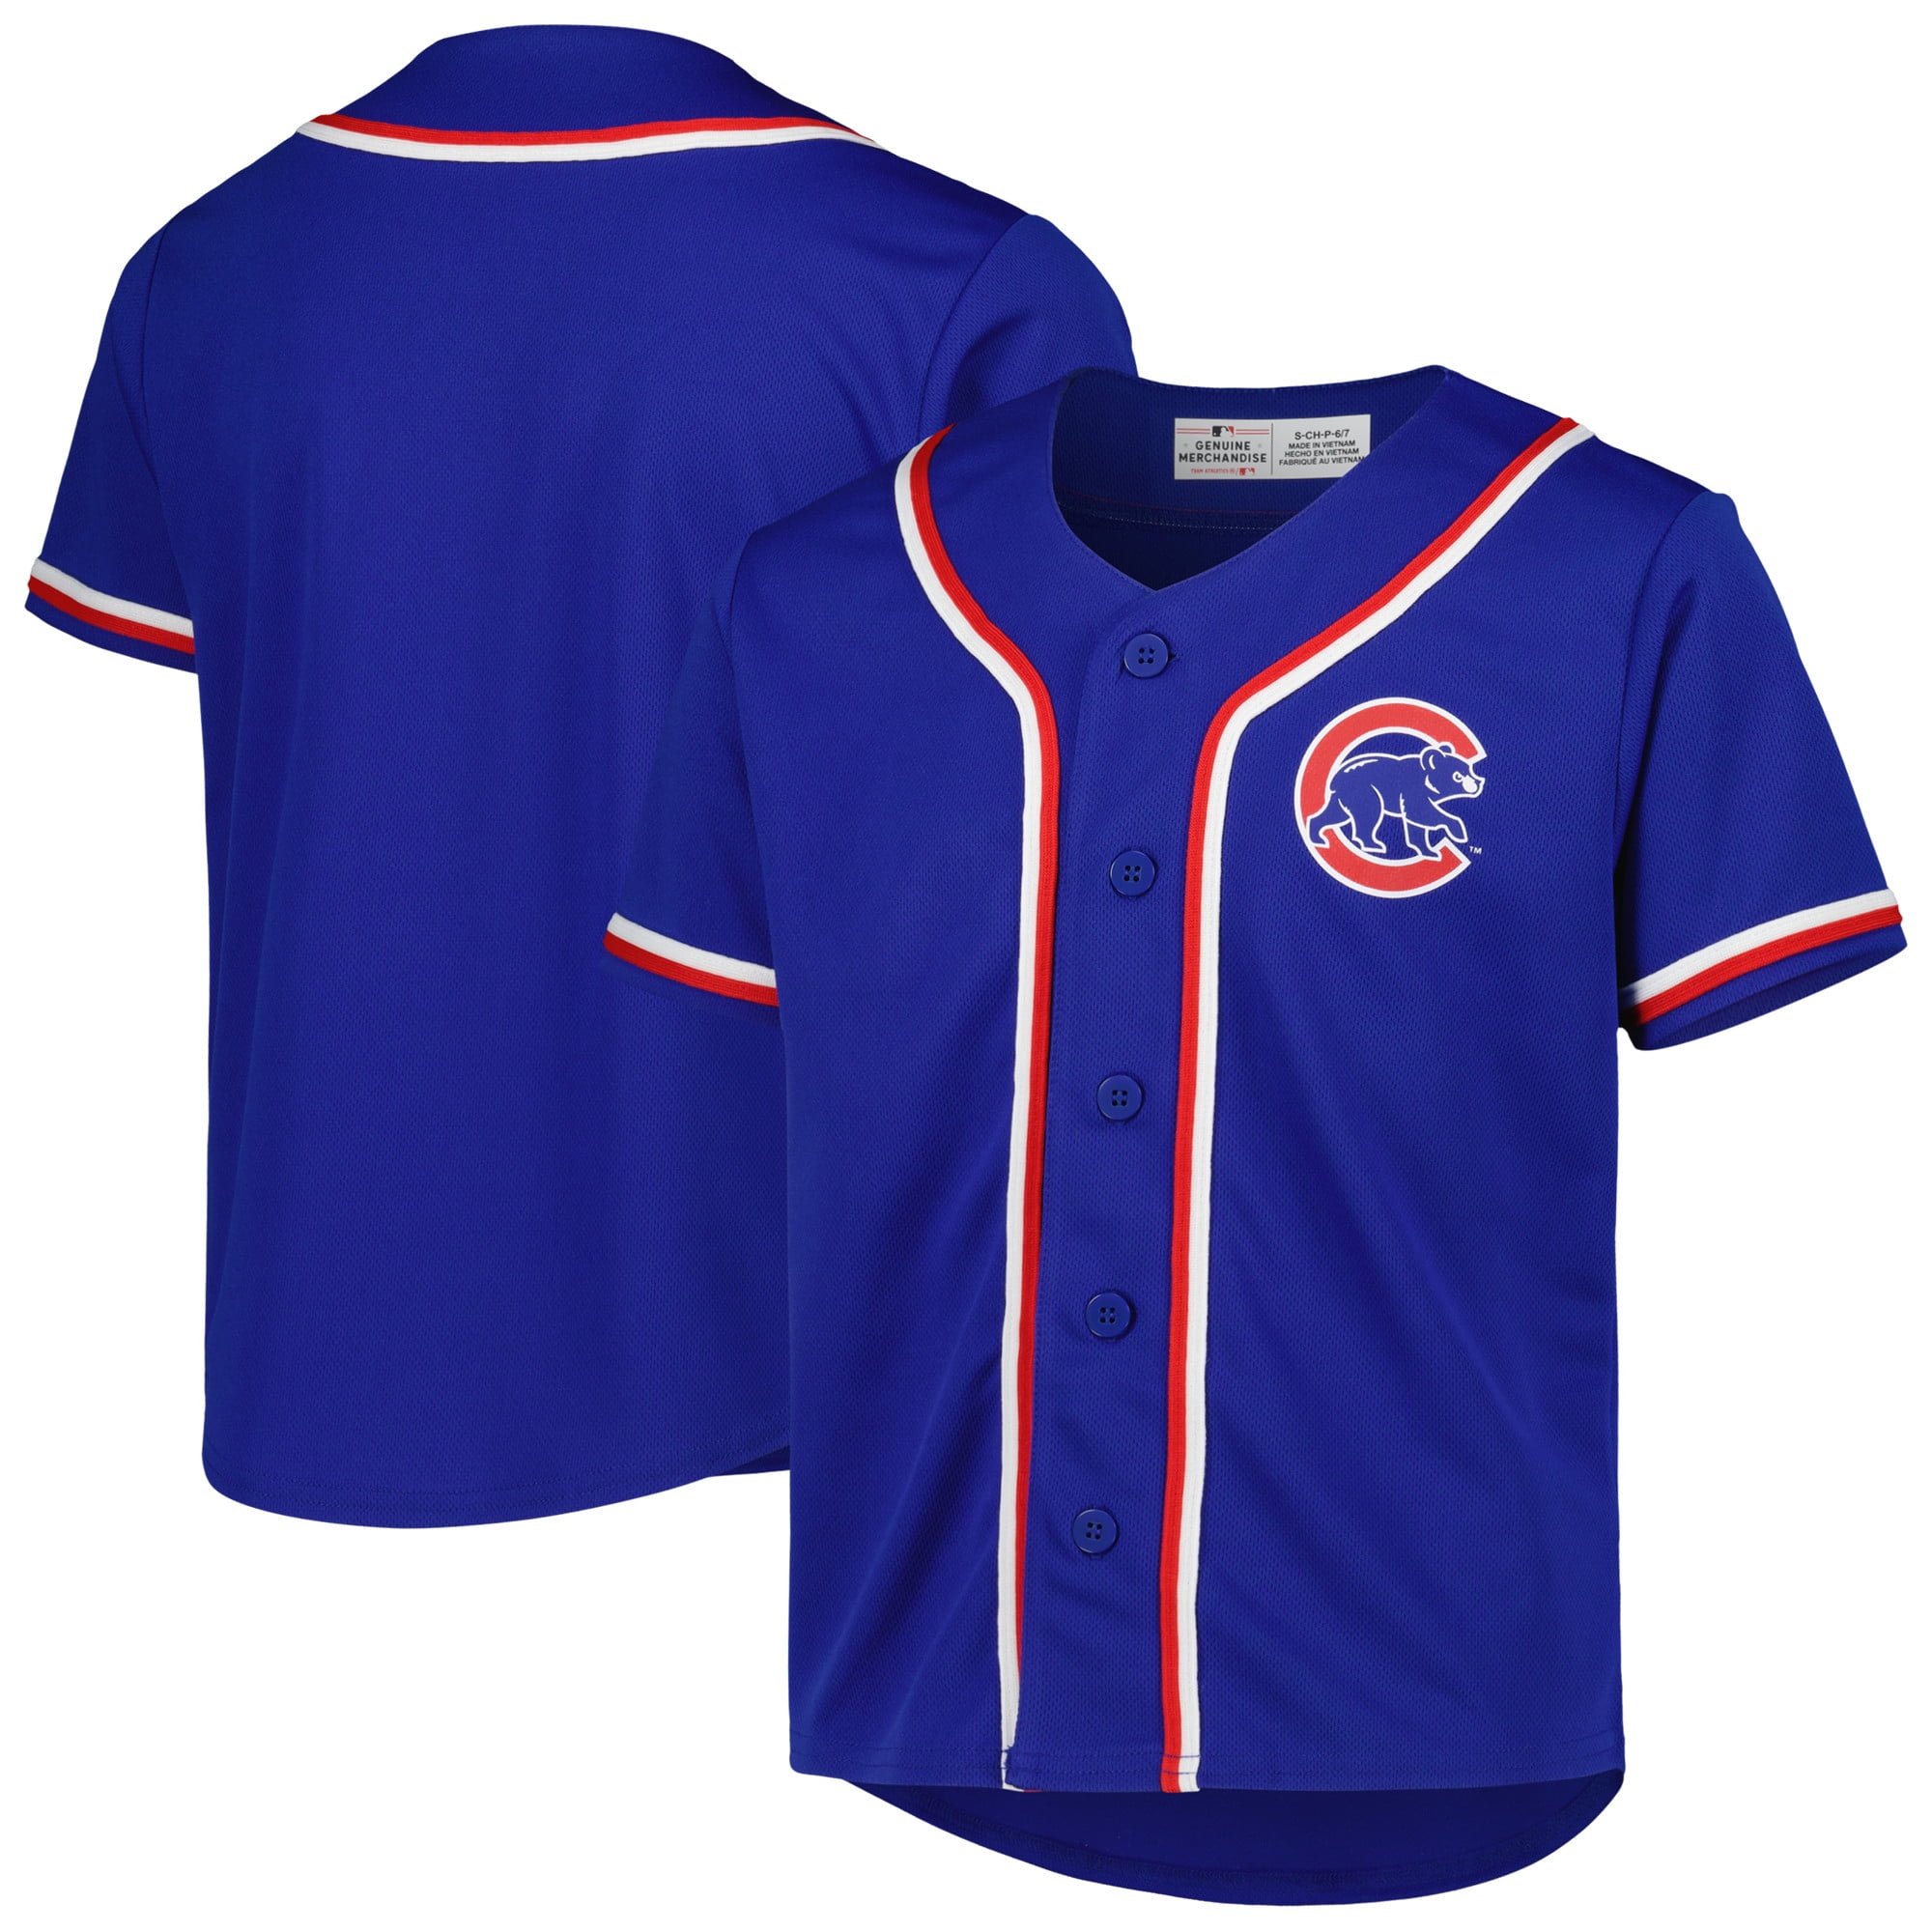 Youth Royal Chicago Cubs Full-Button Replica Jersey 